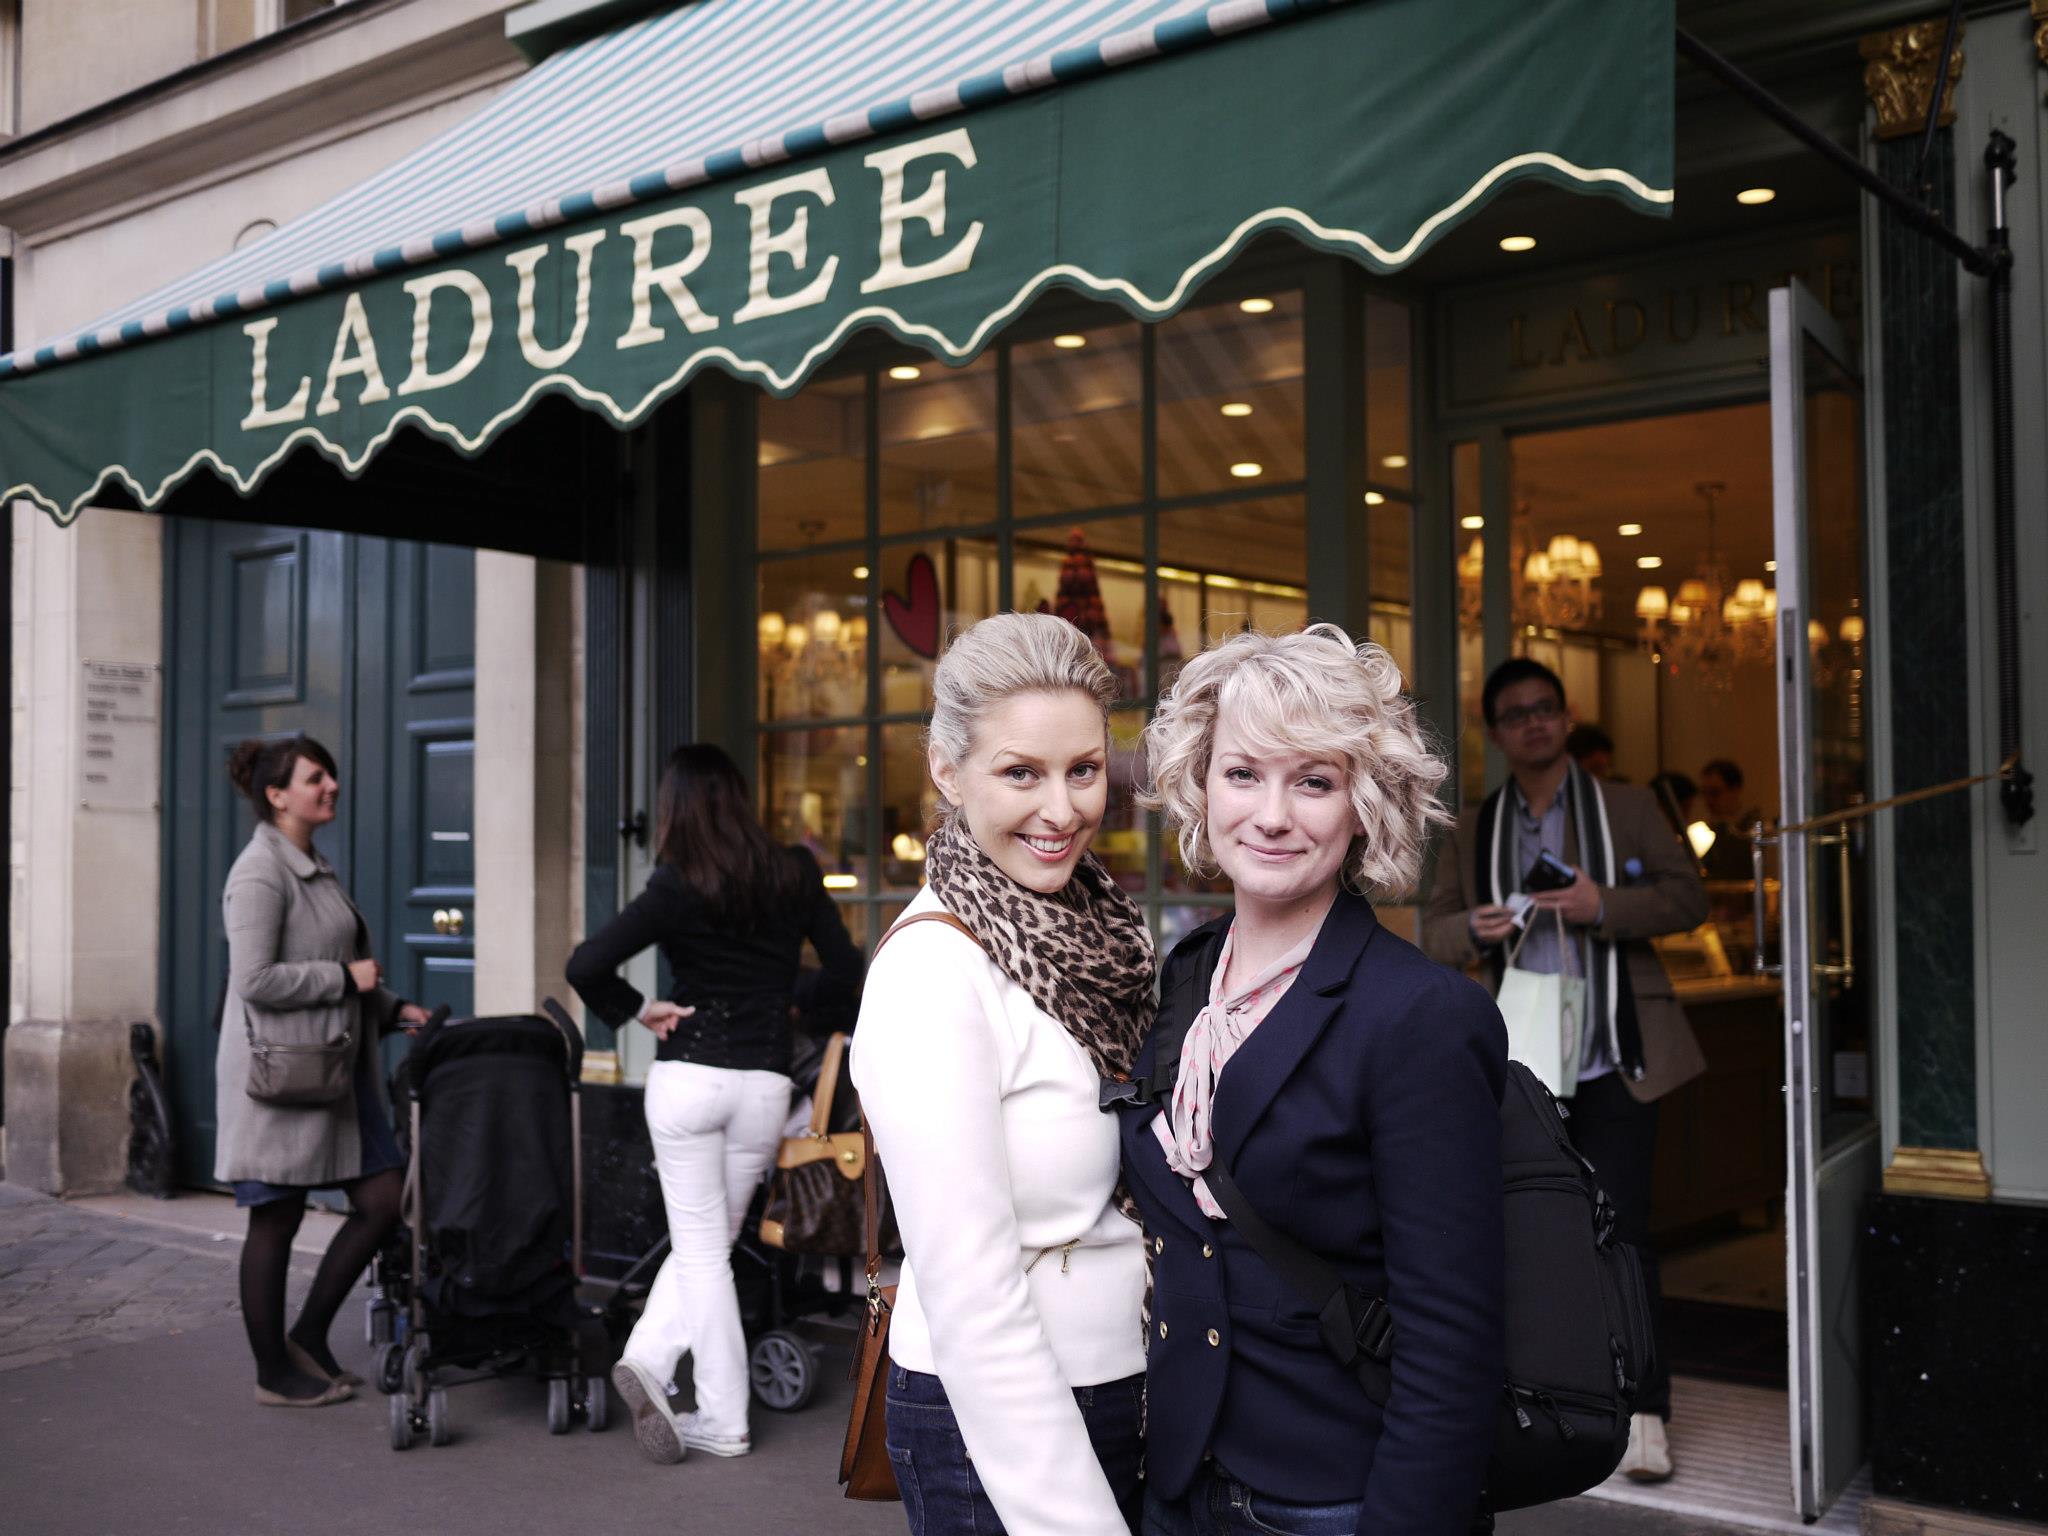 Deneale Goldfields Girl and Liana Finding Femme in Paris wearing chic jackets and scarves